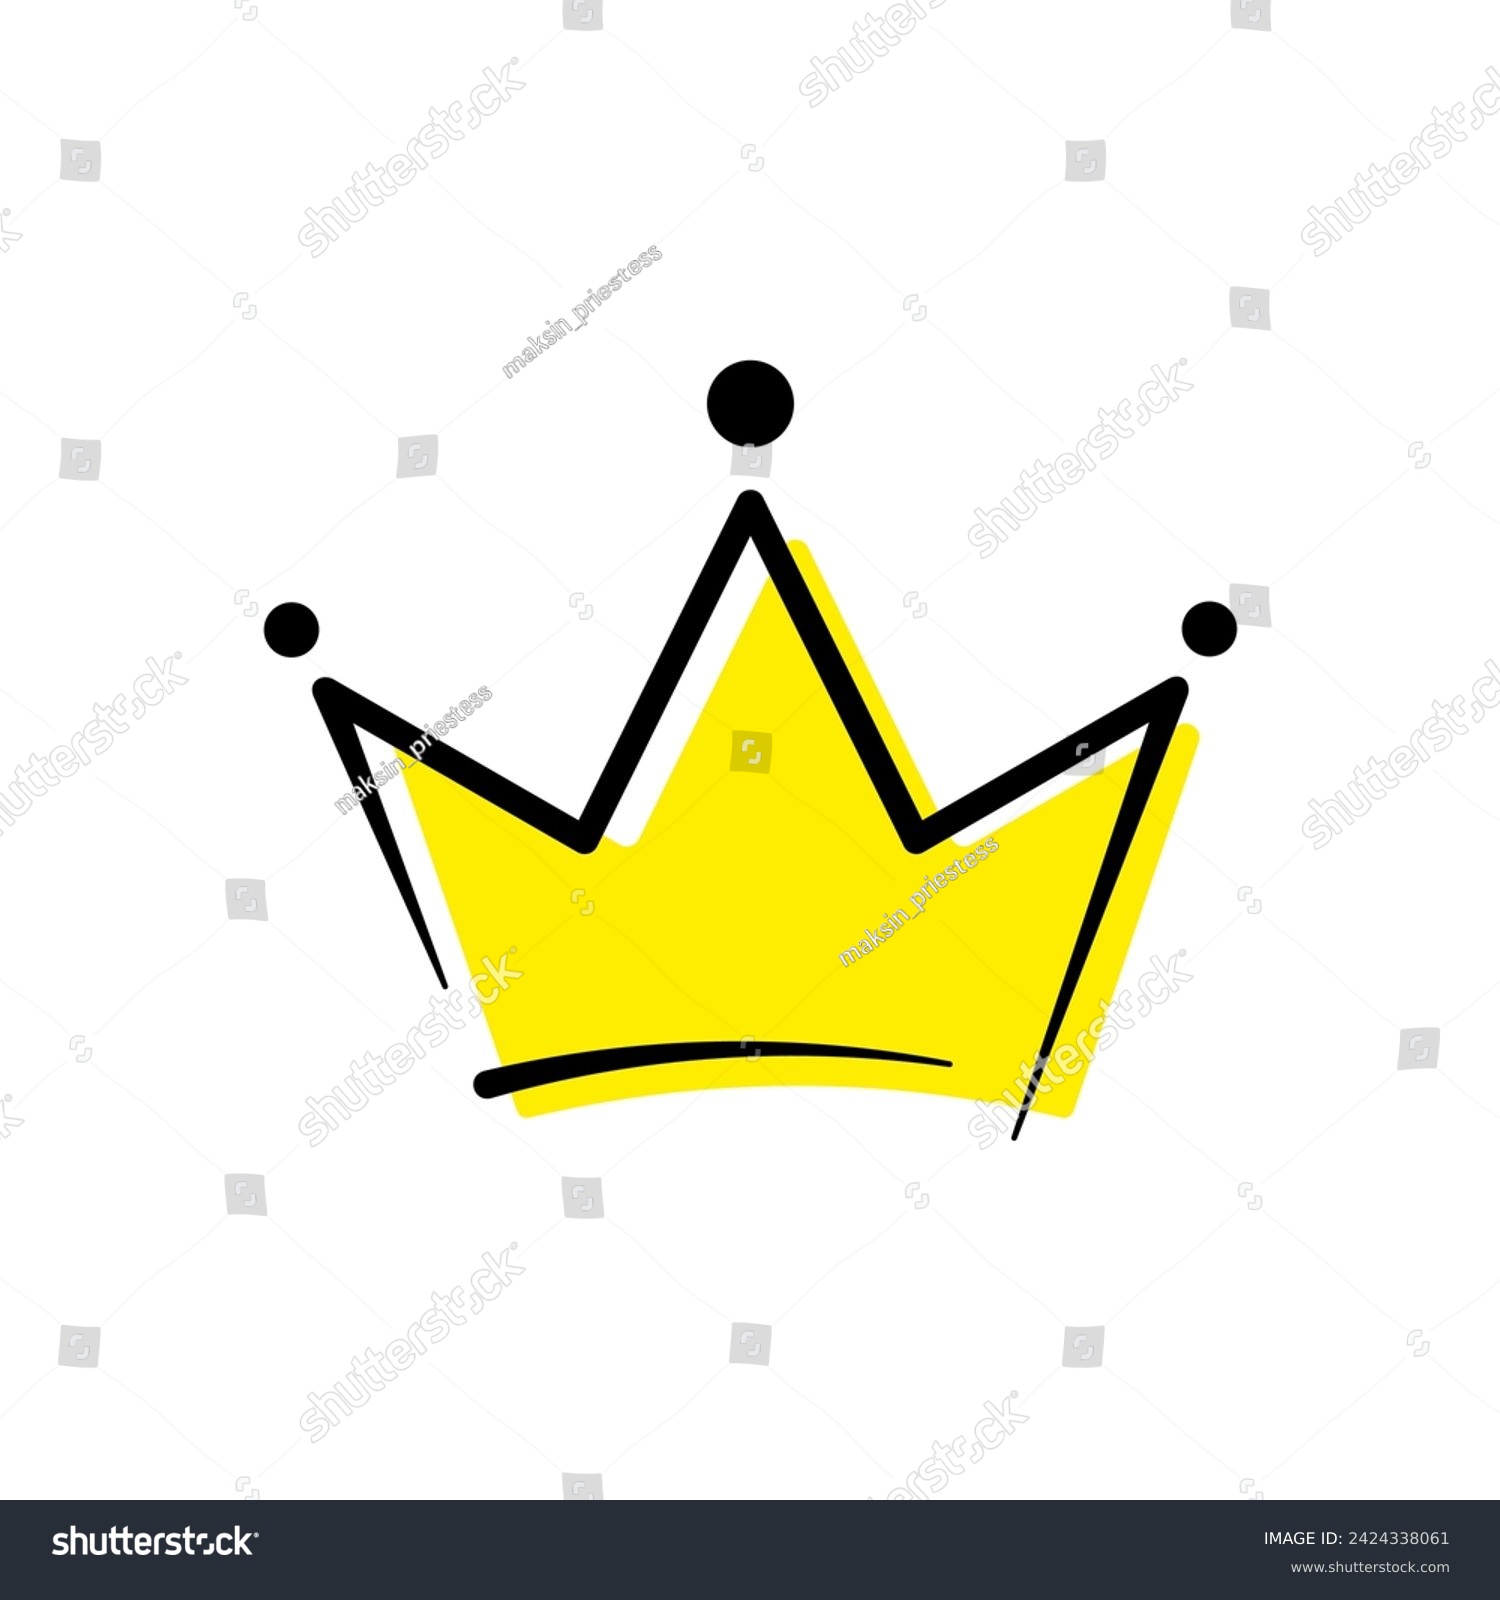 Crown doodle illustration. Stylized yellow drawing with black outline on white background. Best for web, print, logo creating and branding design. #2424338061